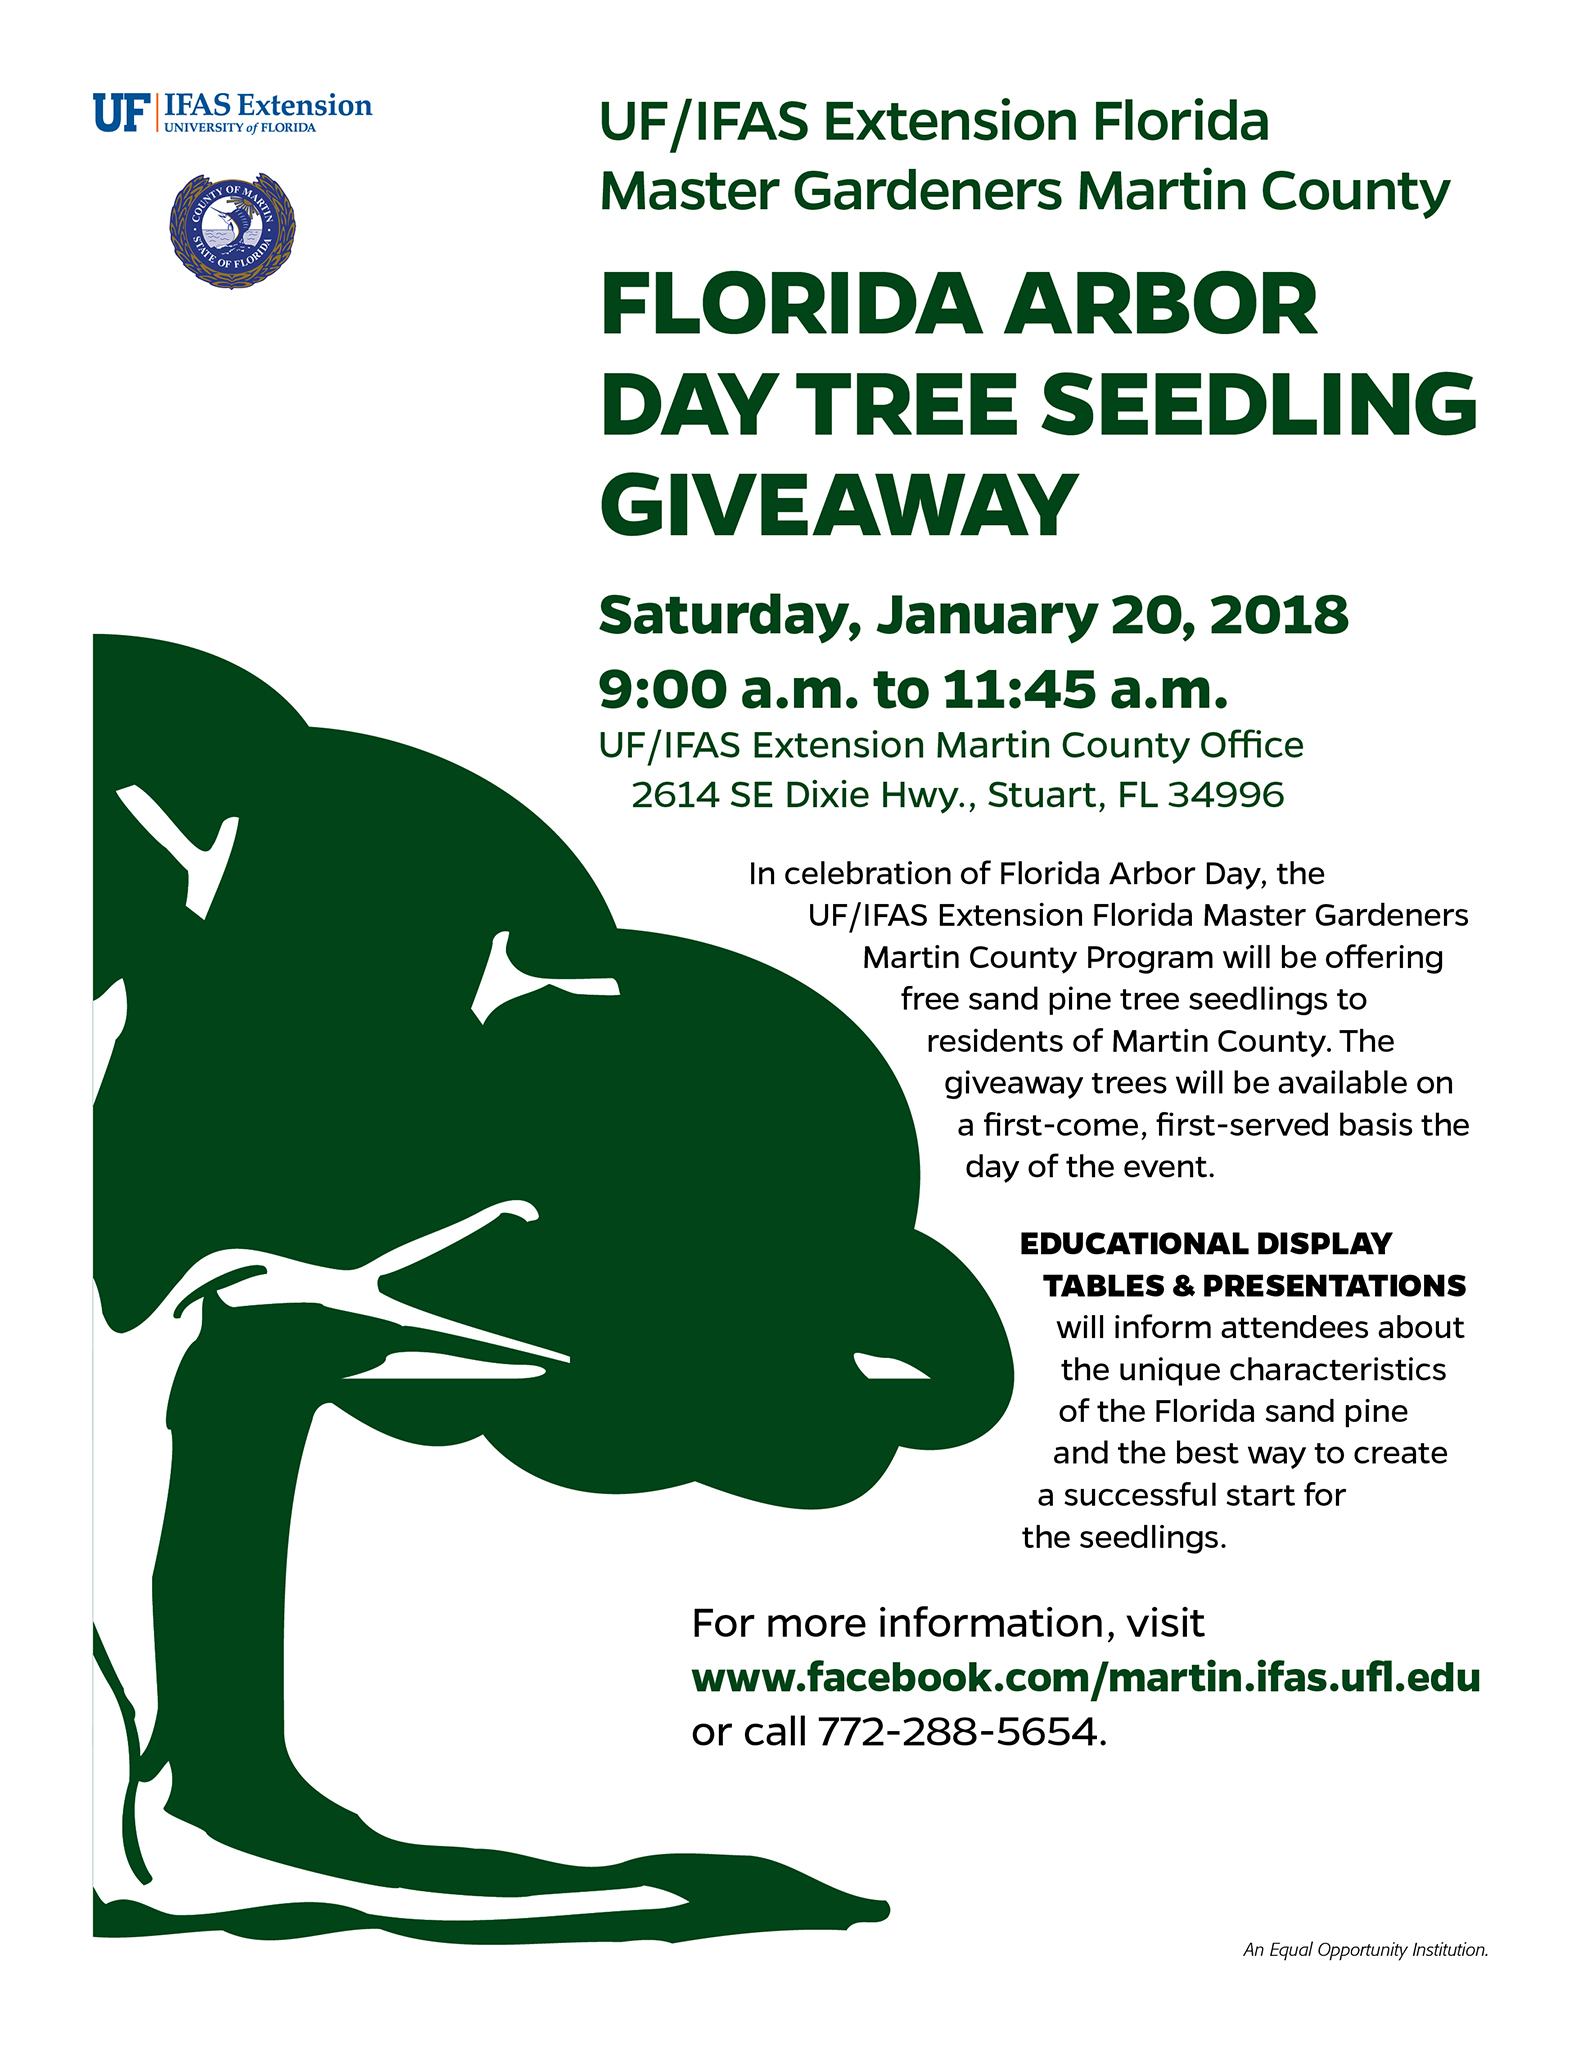 Florida Arbor Day Tree Seedling Giveaway UF/IFAS Extension Martin County